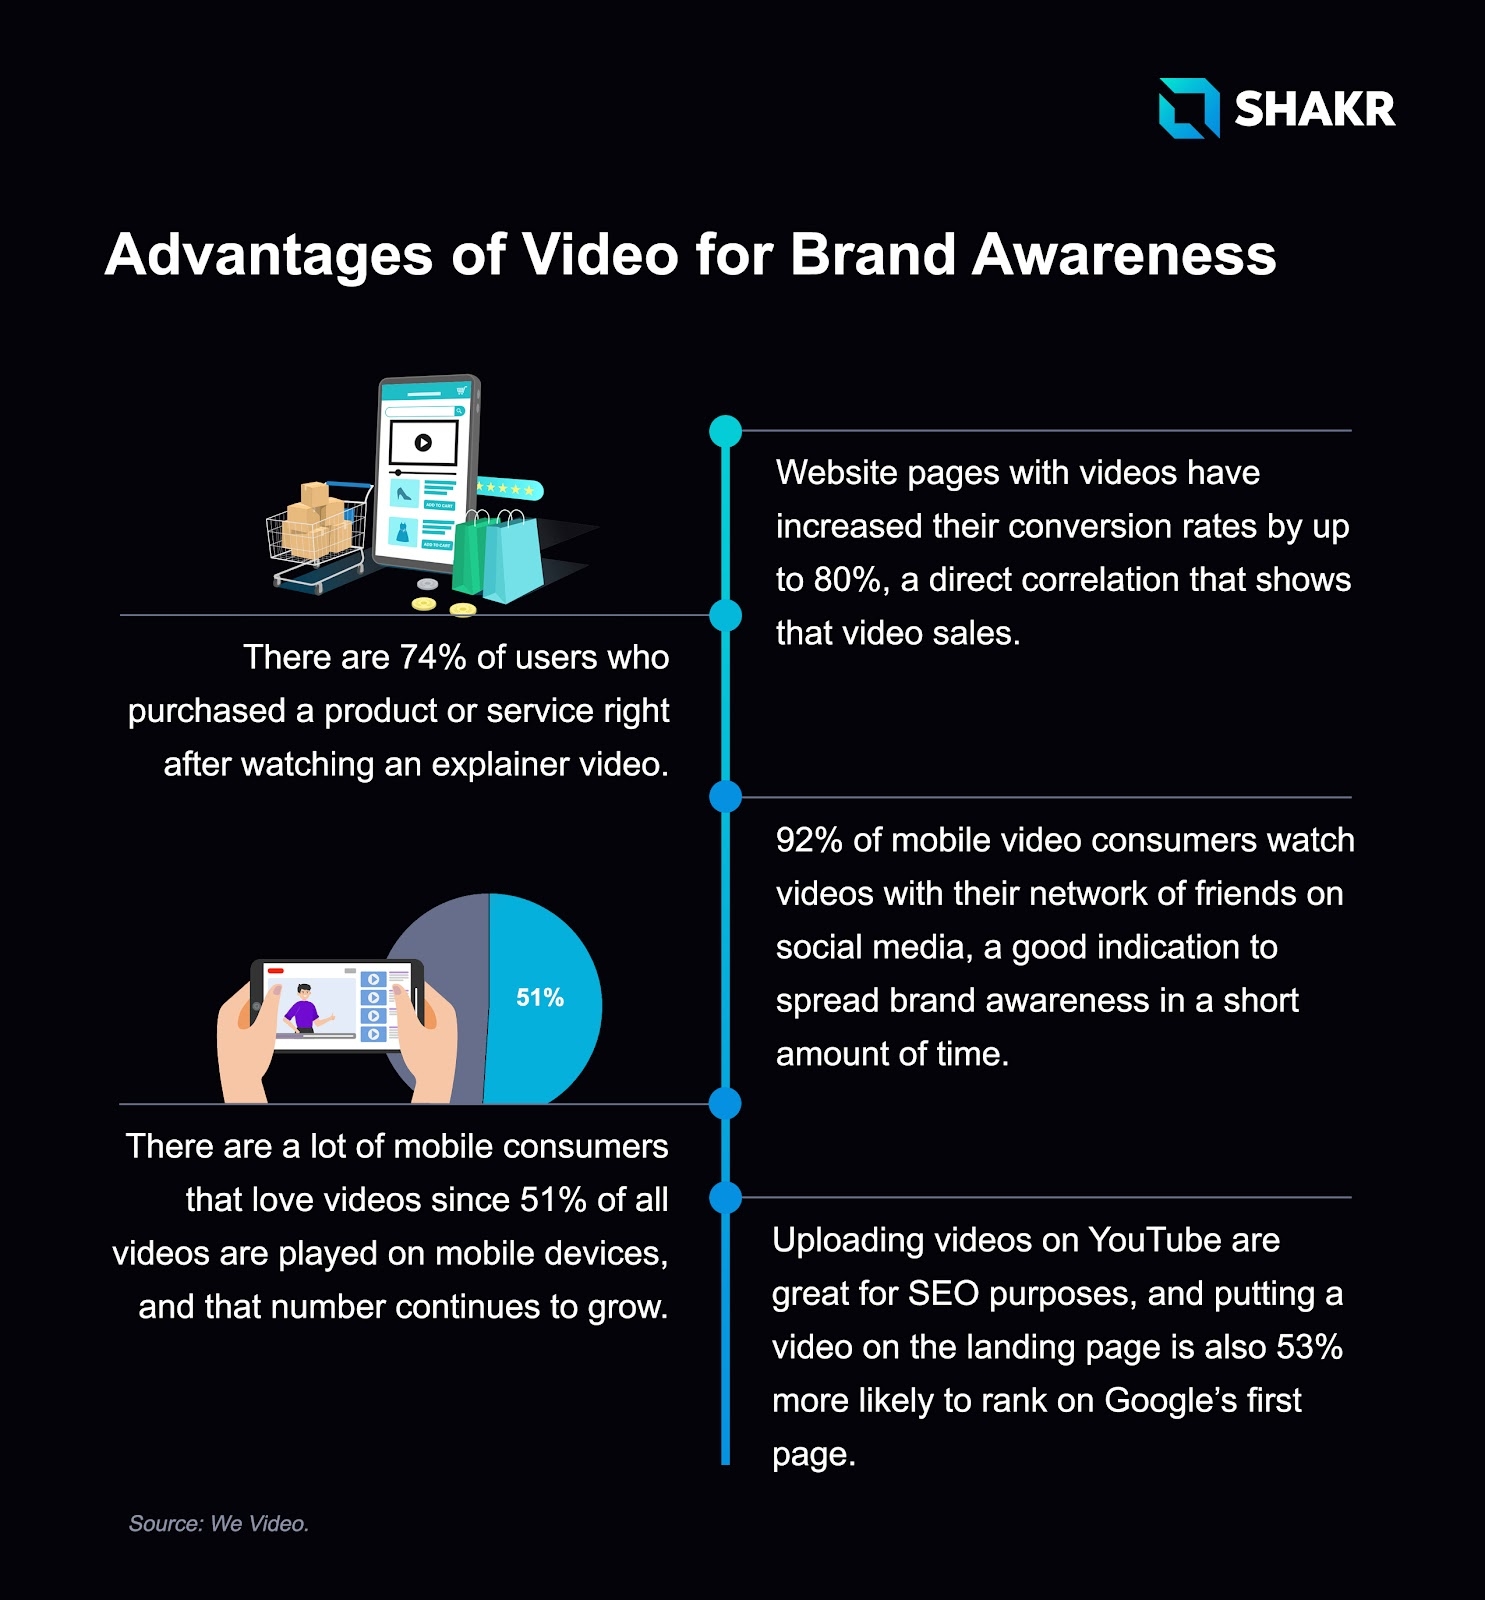 Stand Out for the Holidays with Video: Tips to Ramp Up 2021 Holiday Brand Awareness